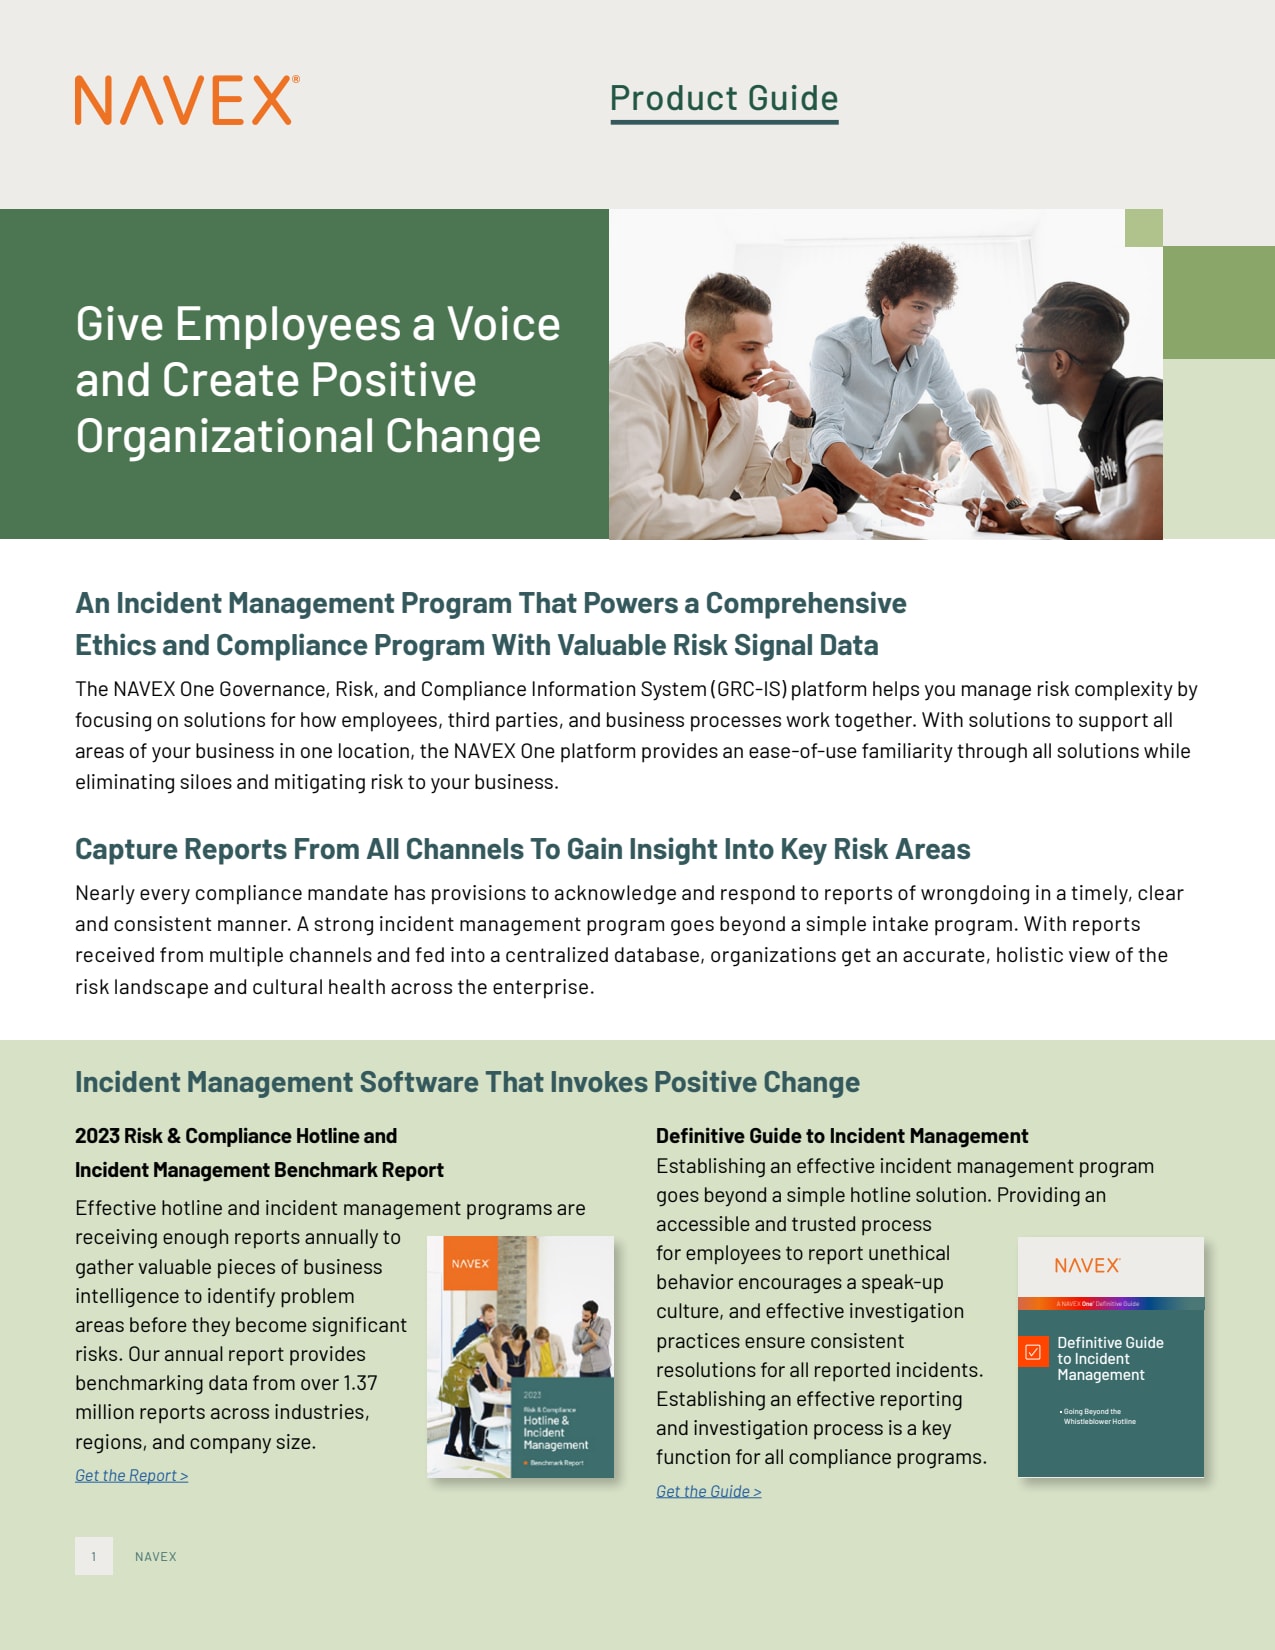 Give Employees a Voice and Create Positive Organizational Change